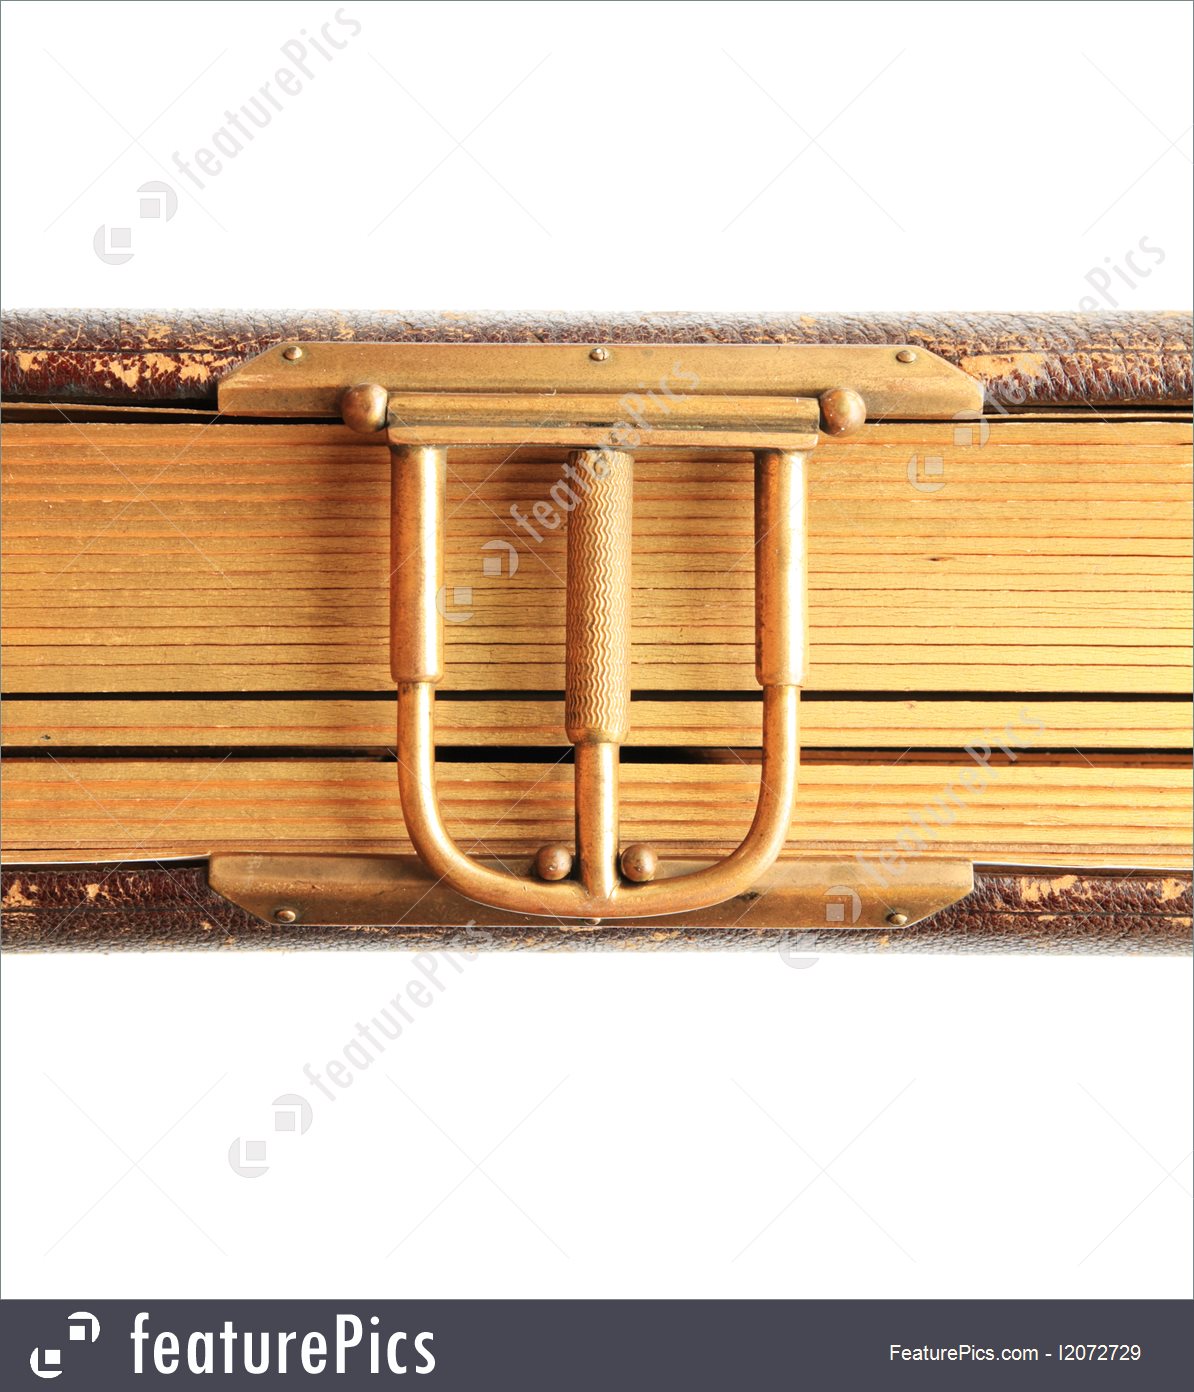 buckle-book-clasp-stock-picture-1072729.jpg